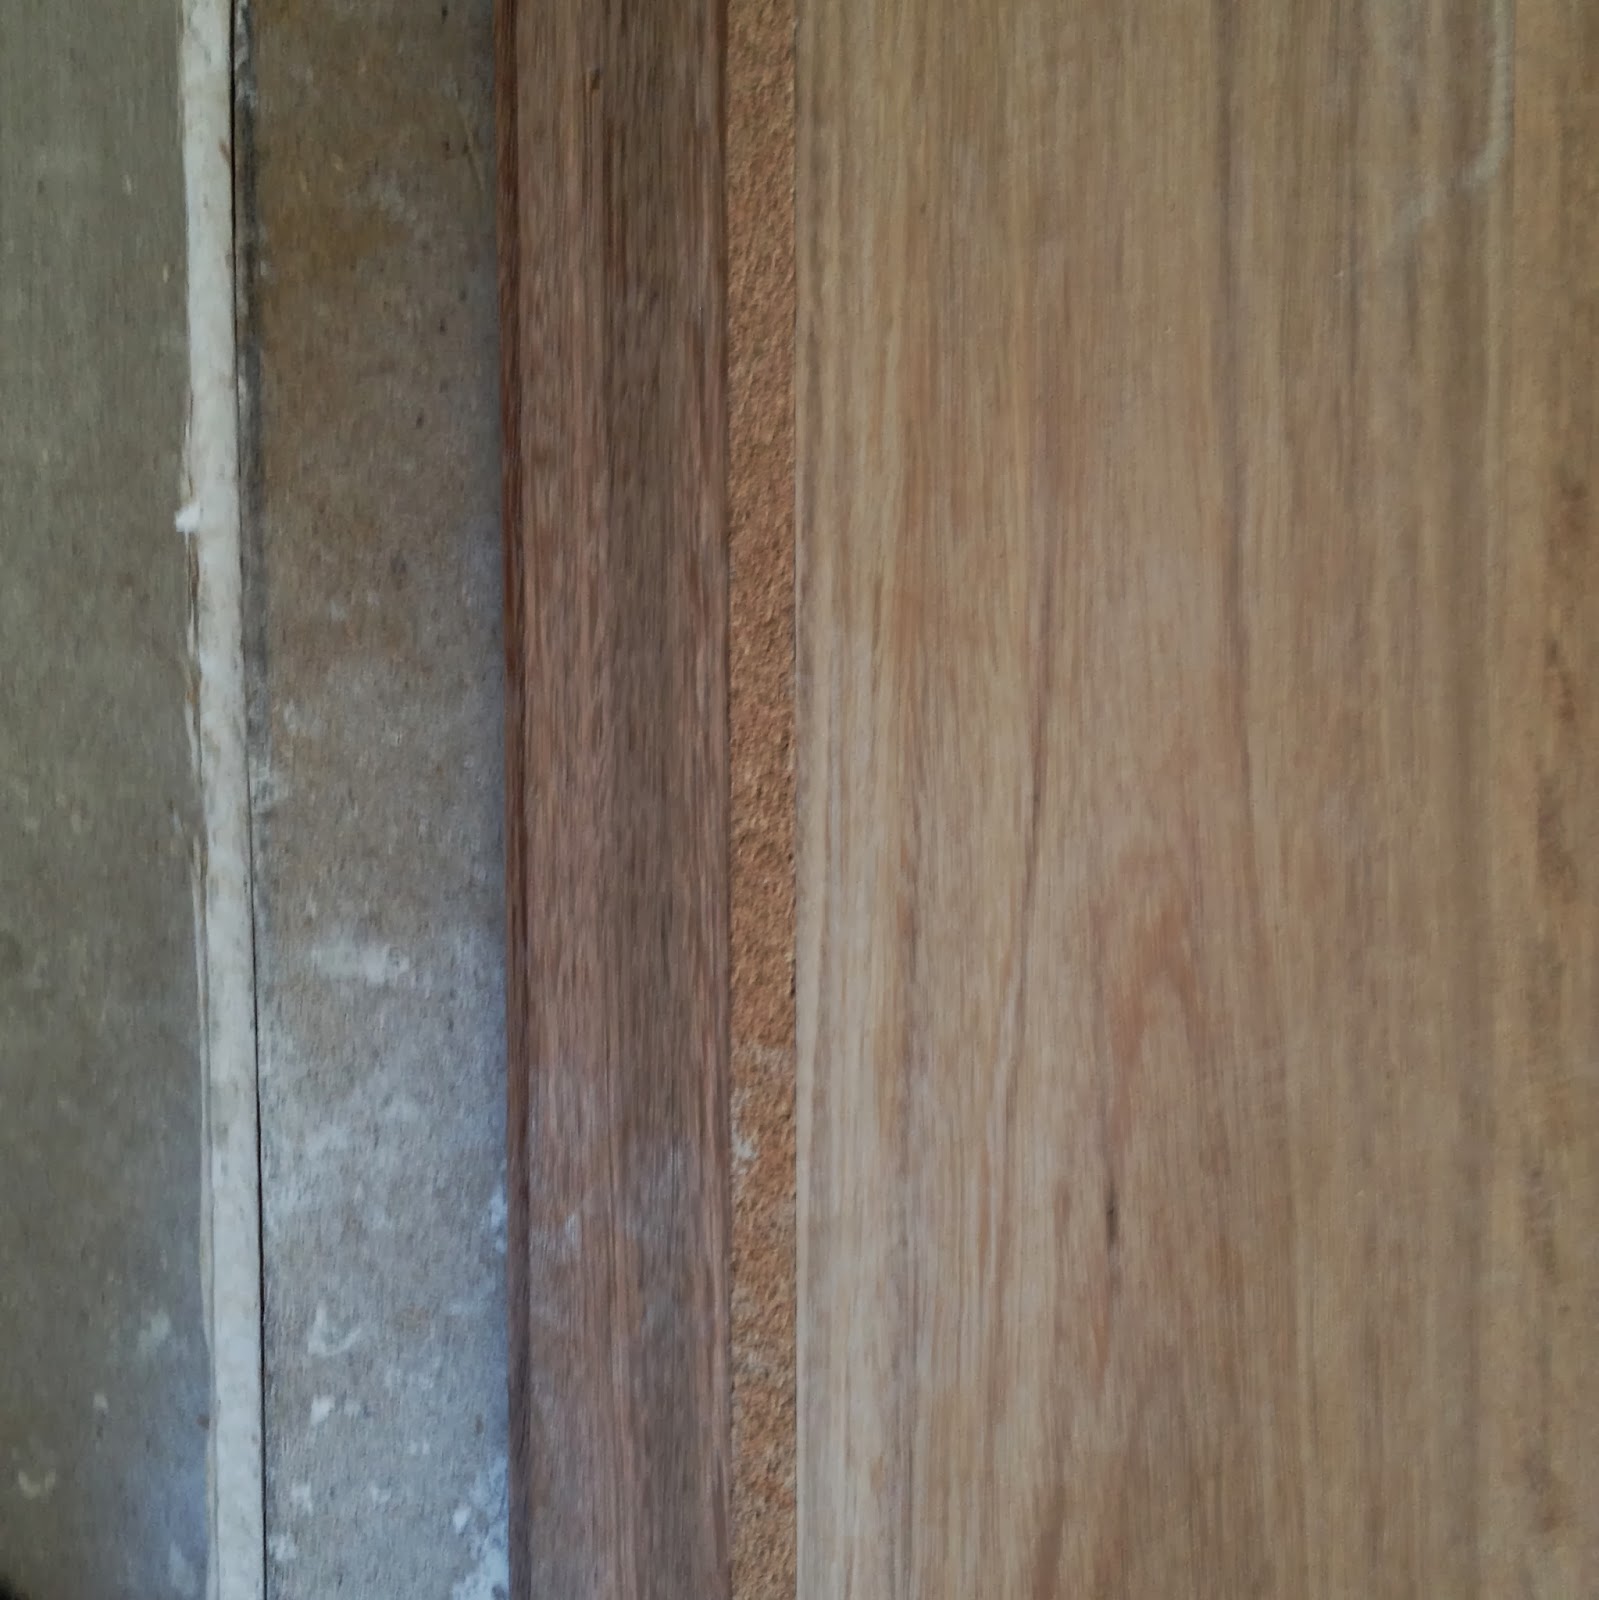 West End Cottage Timber Floors And Expansion Joints